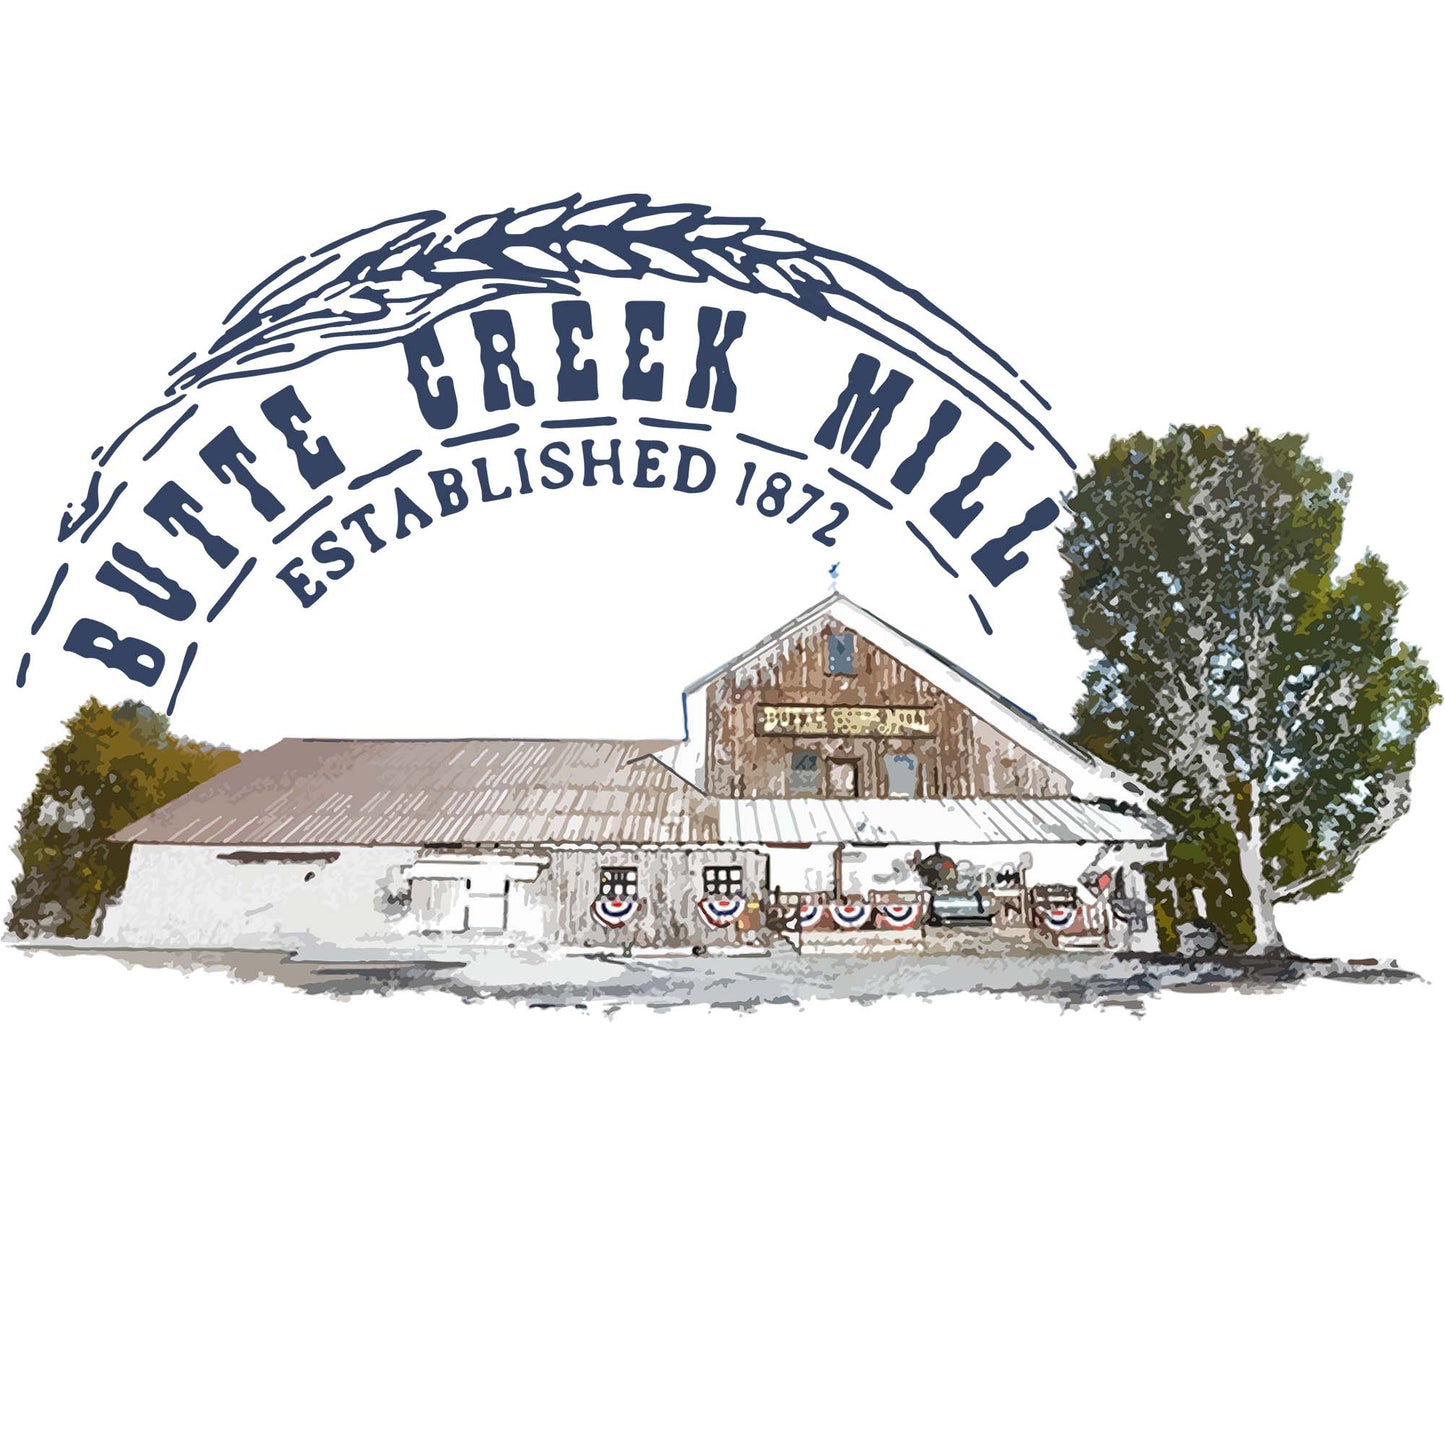 Donate to the Butte Creek Mill